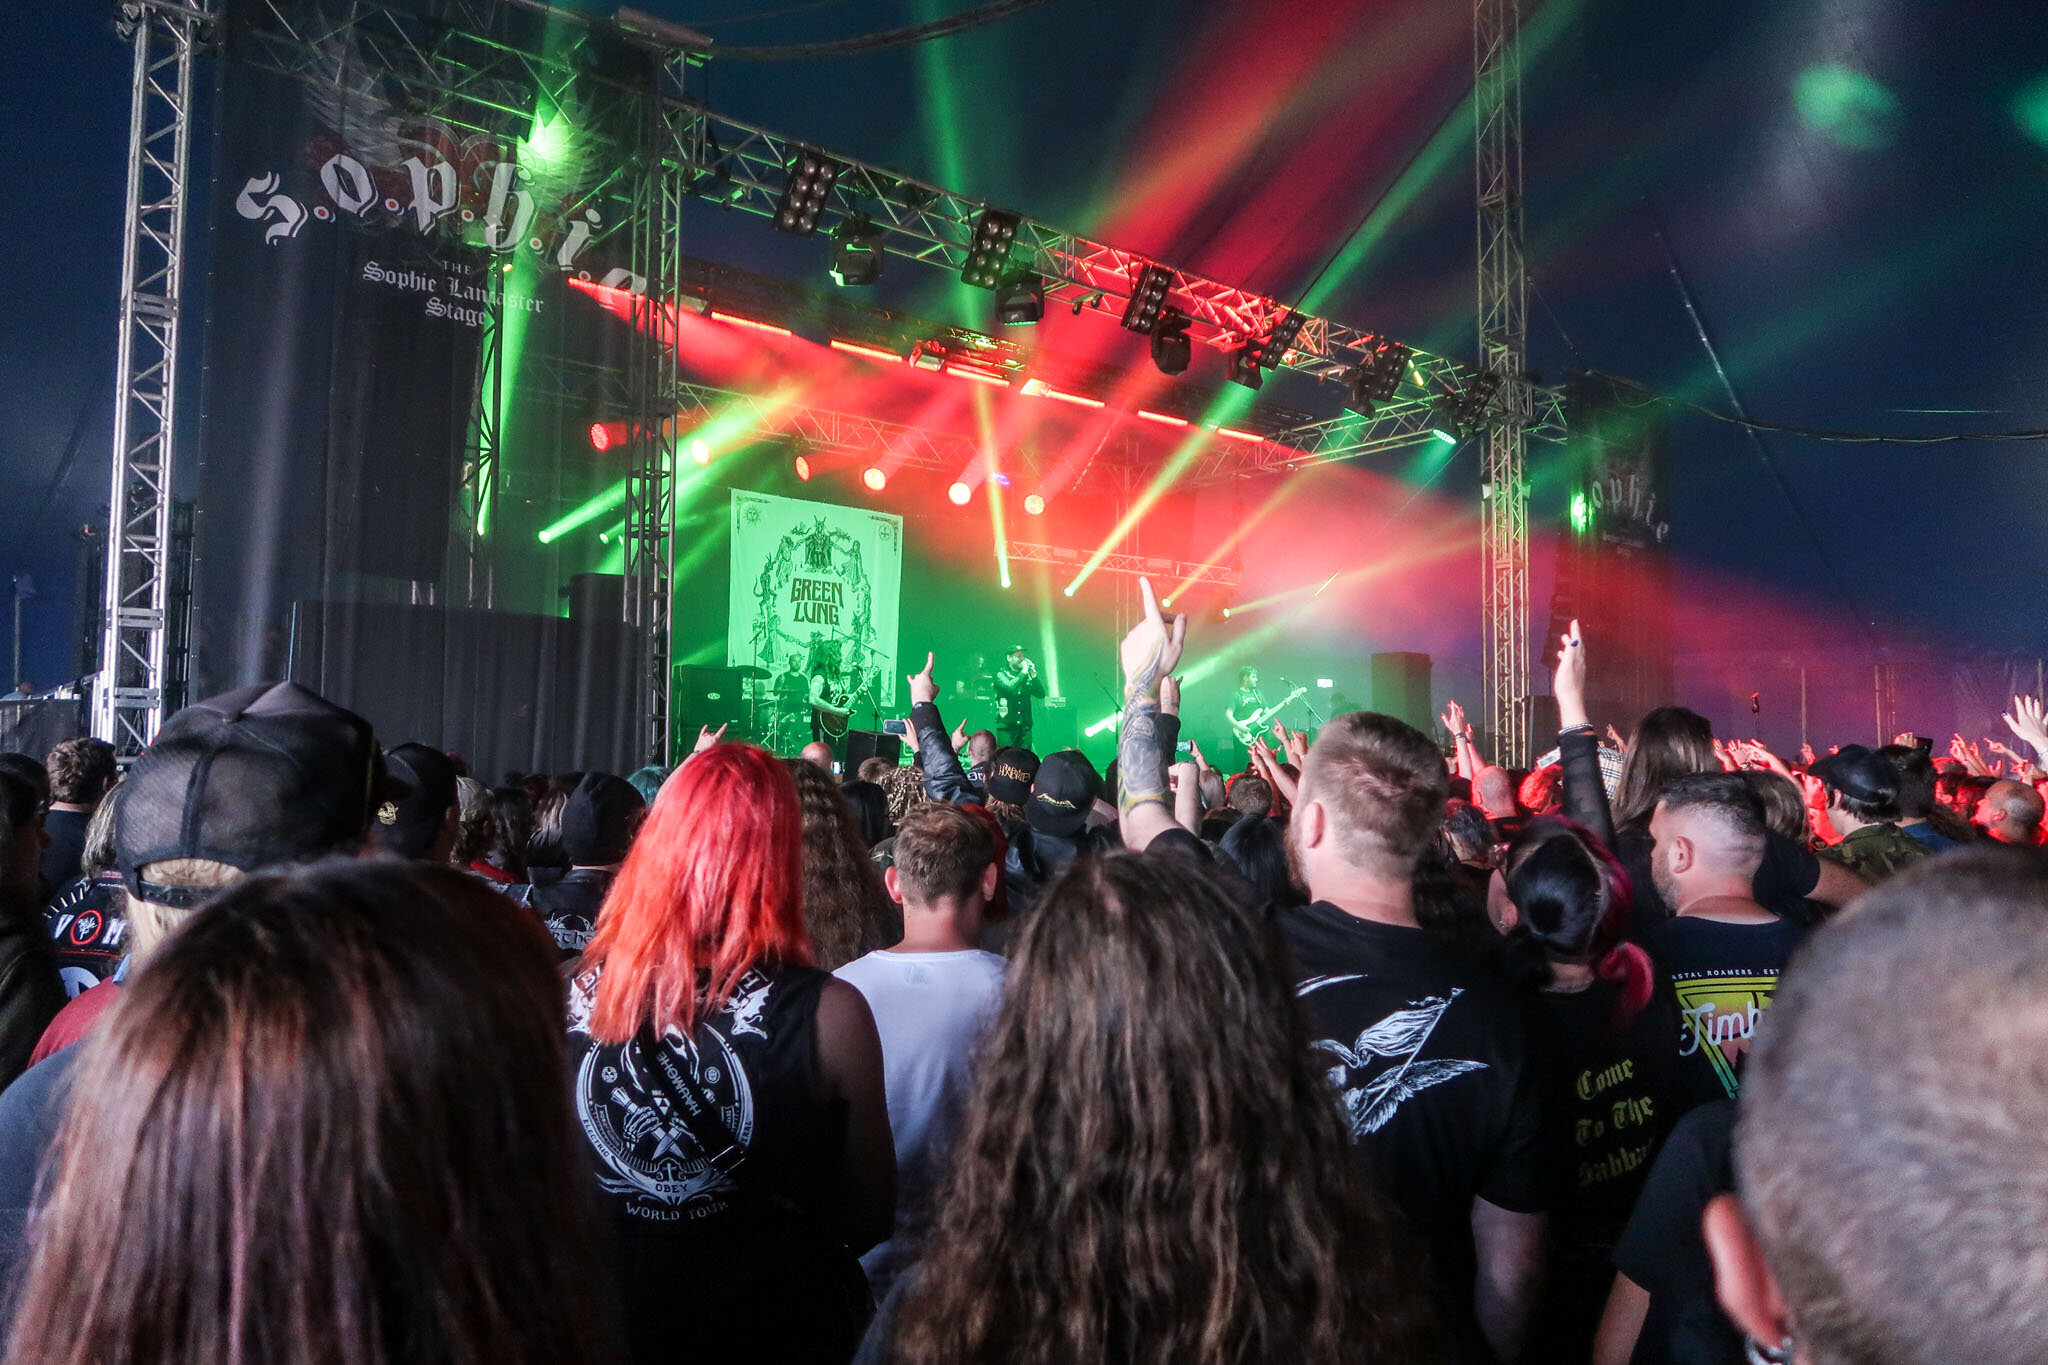 Green Lung at Bloodstock Open Air Festival 2021